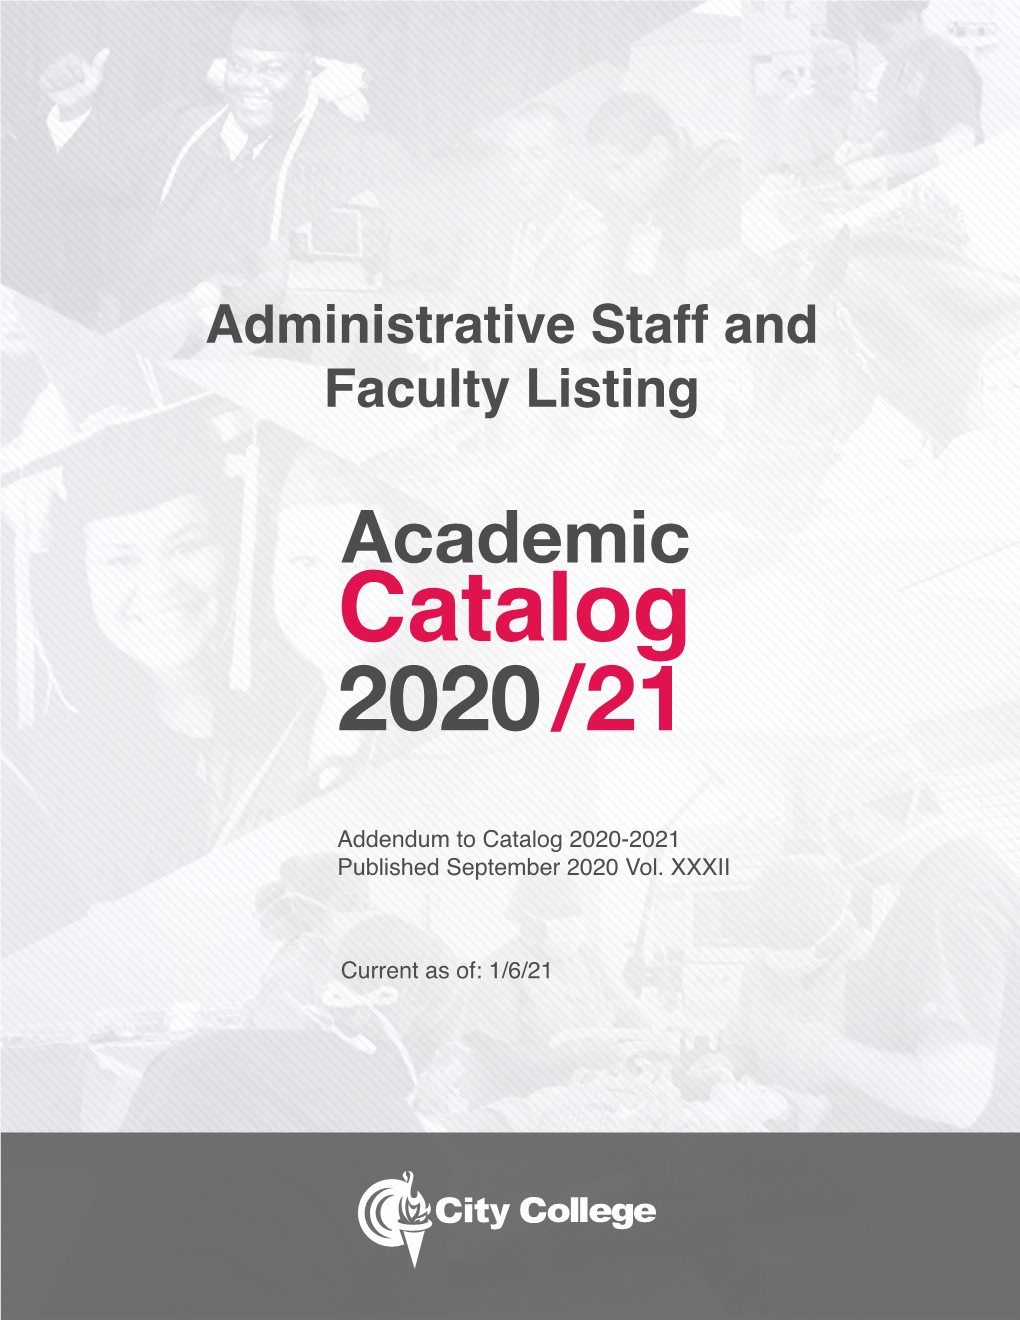 Administrative Staff and Faculty Listing